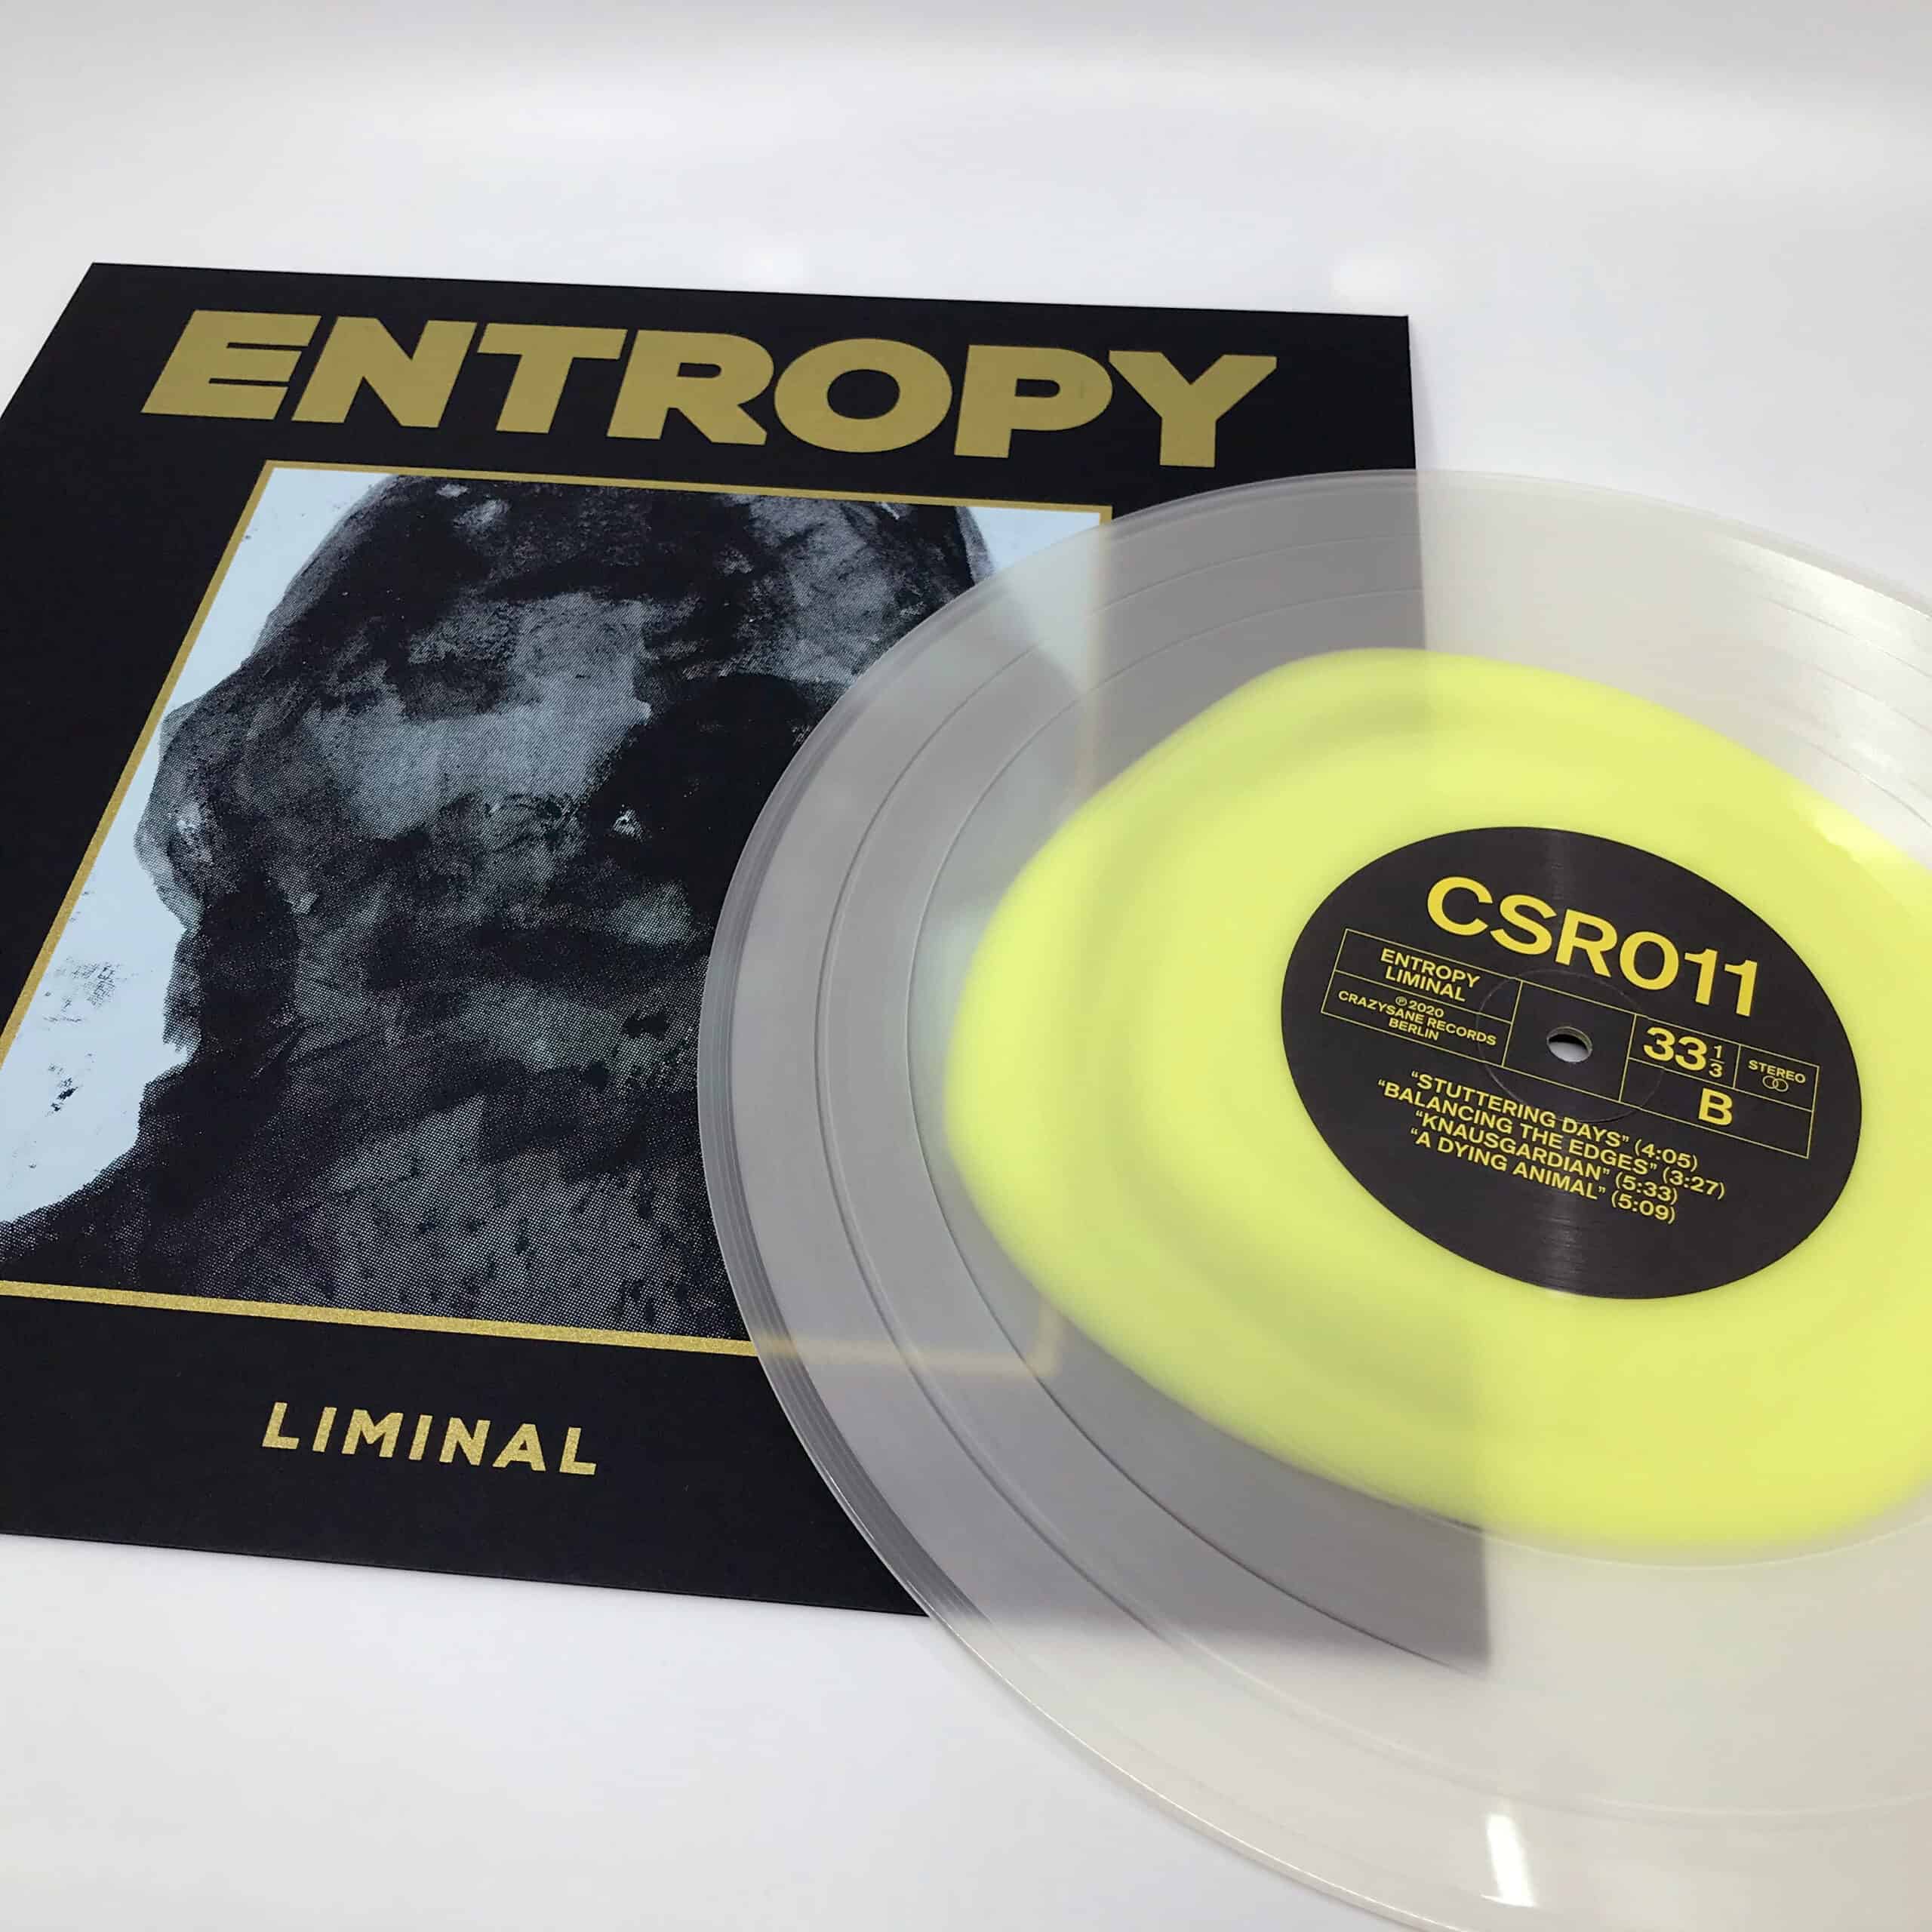 Entropy - Liminal col.LP / Silkscreen Edition (Crazysane) Entropy initially started out as a bedroom project but soon developed into a full-fledged band devoted to fusing heavier post-hardcore sounds and indie and shoegaze elements. Think Hüsker Dü meets Helmet meets Nothing meets Torche. There’s a distinct 90s vibe here, sure, but Entropy doesn’t just want to conjure up the past – their energy and drive propels them into the present and keeps their feet firmly planted in the here and now. The band features former and current members of The Now-Denial, Night Slug, Hillside and EA80.